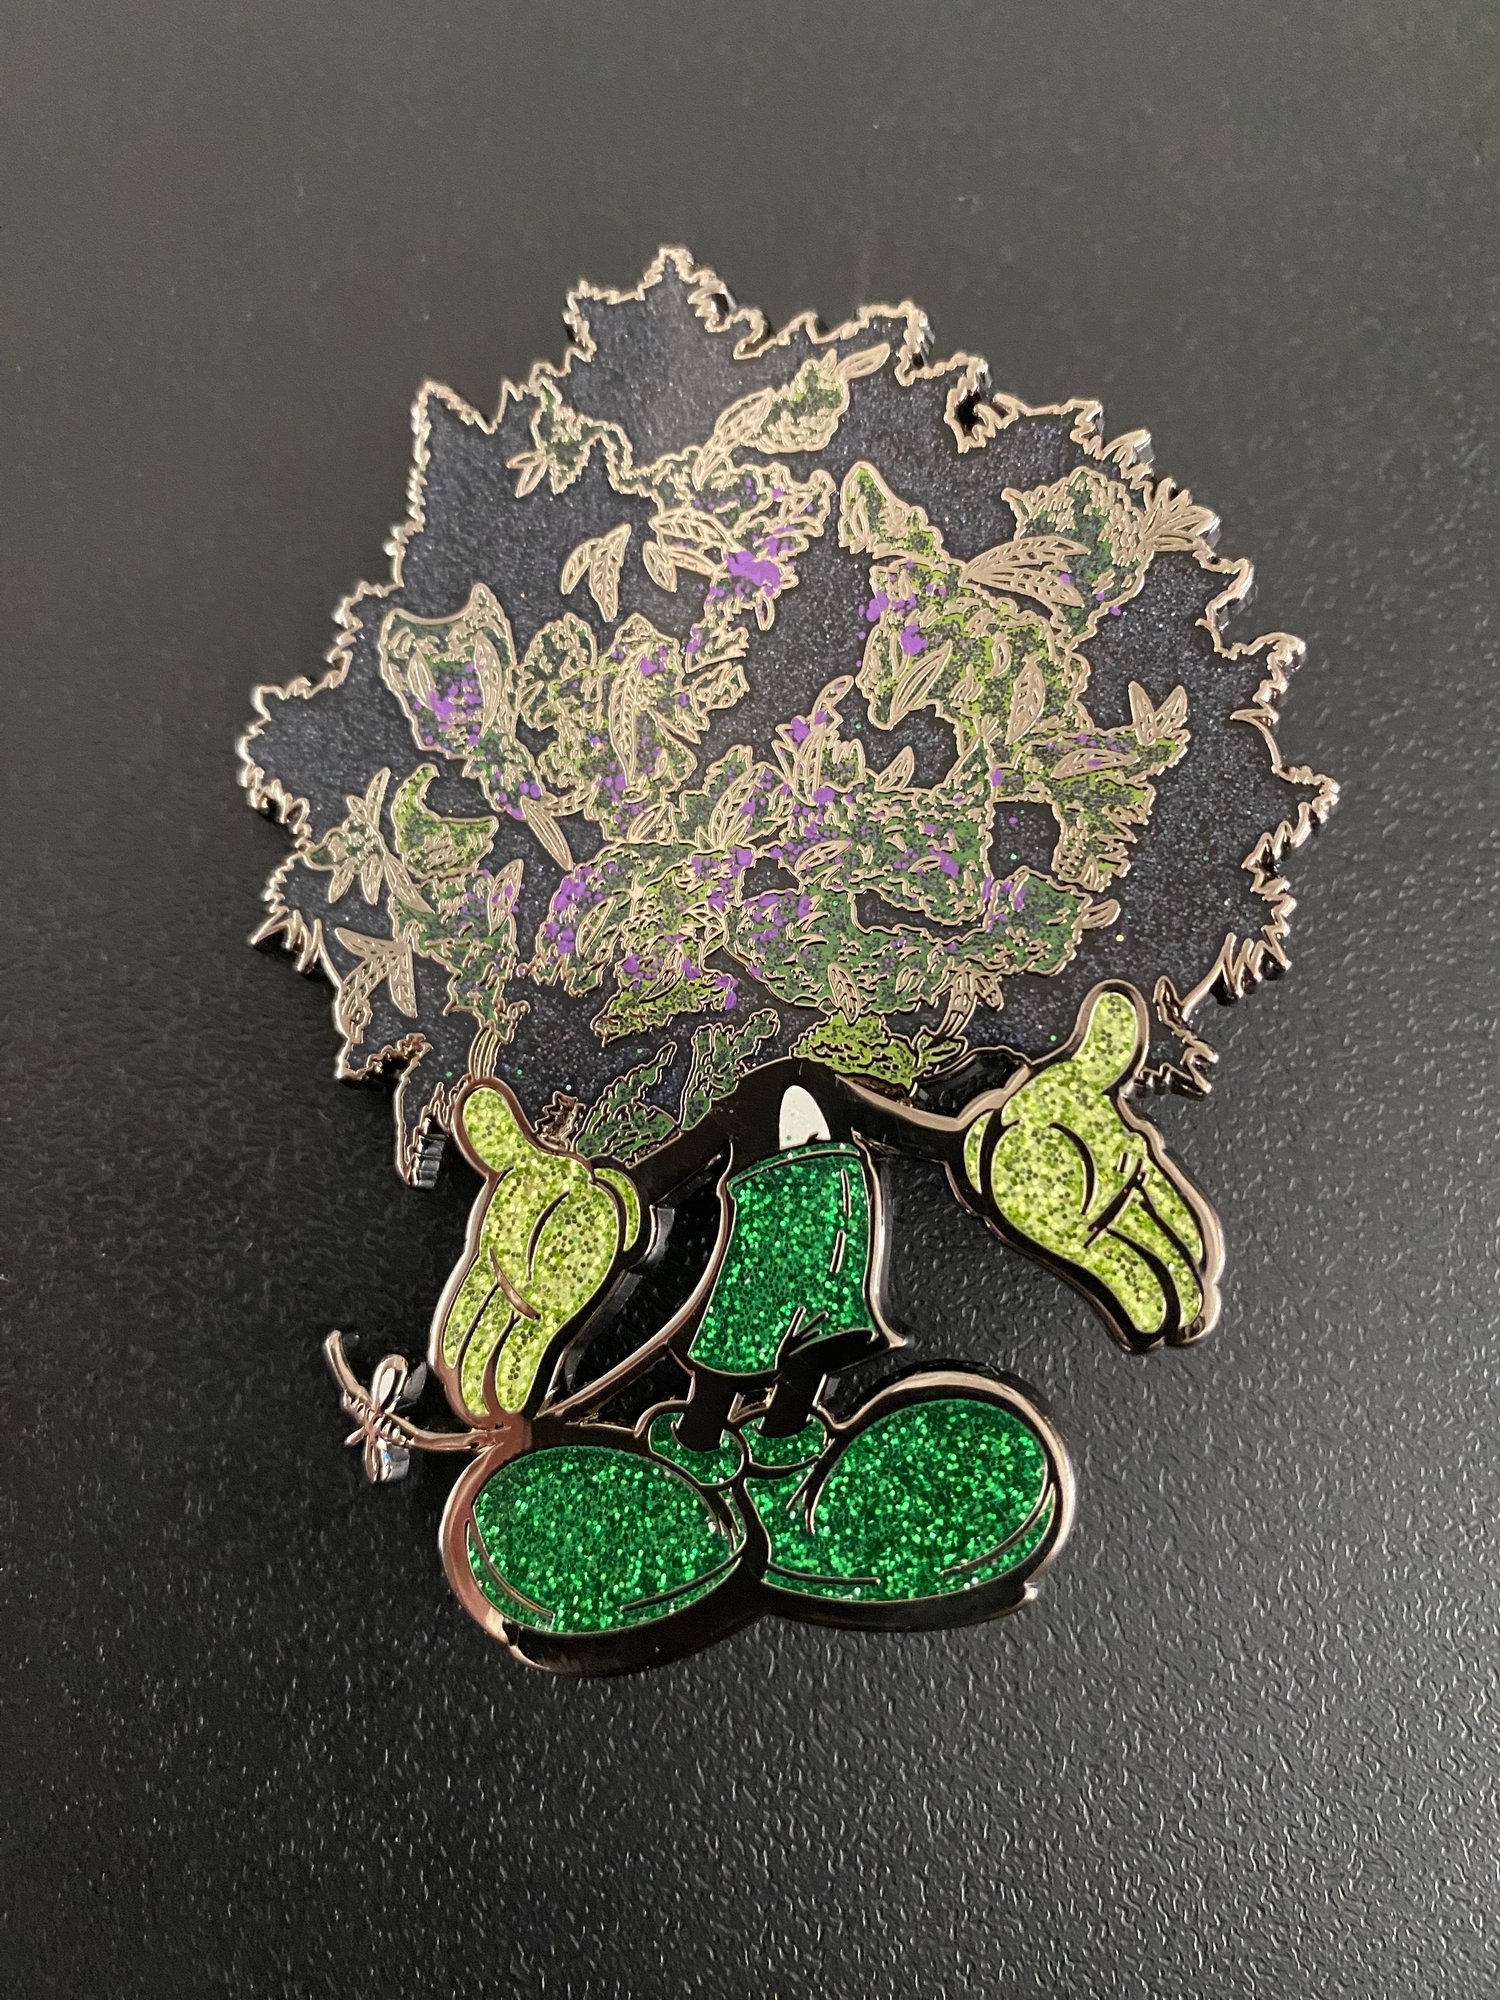 Image of Large Glitter filled “WEEDHEAD” Pin